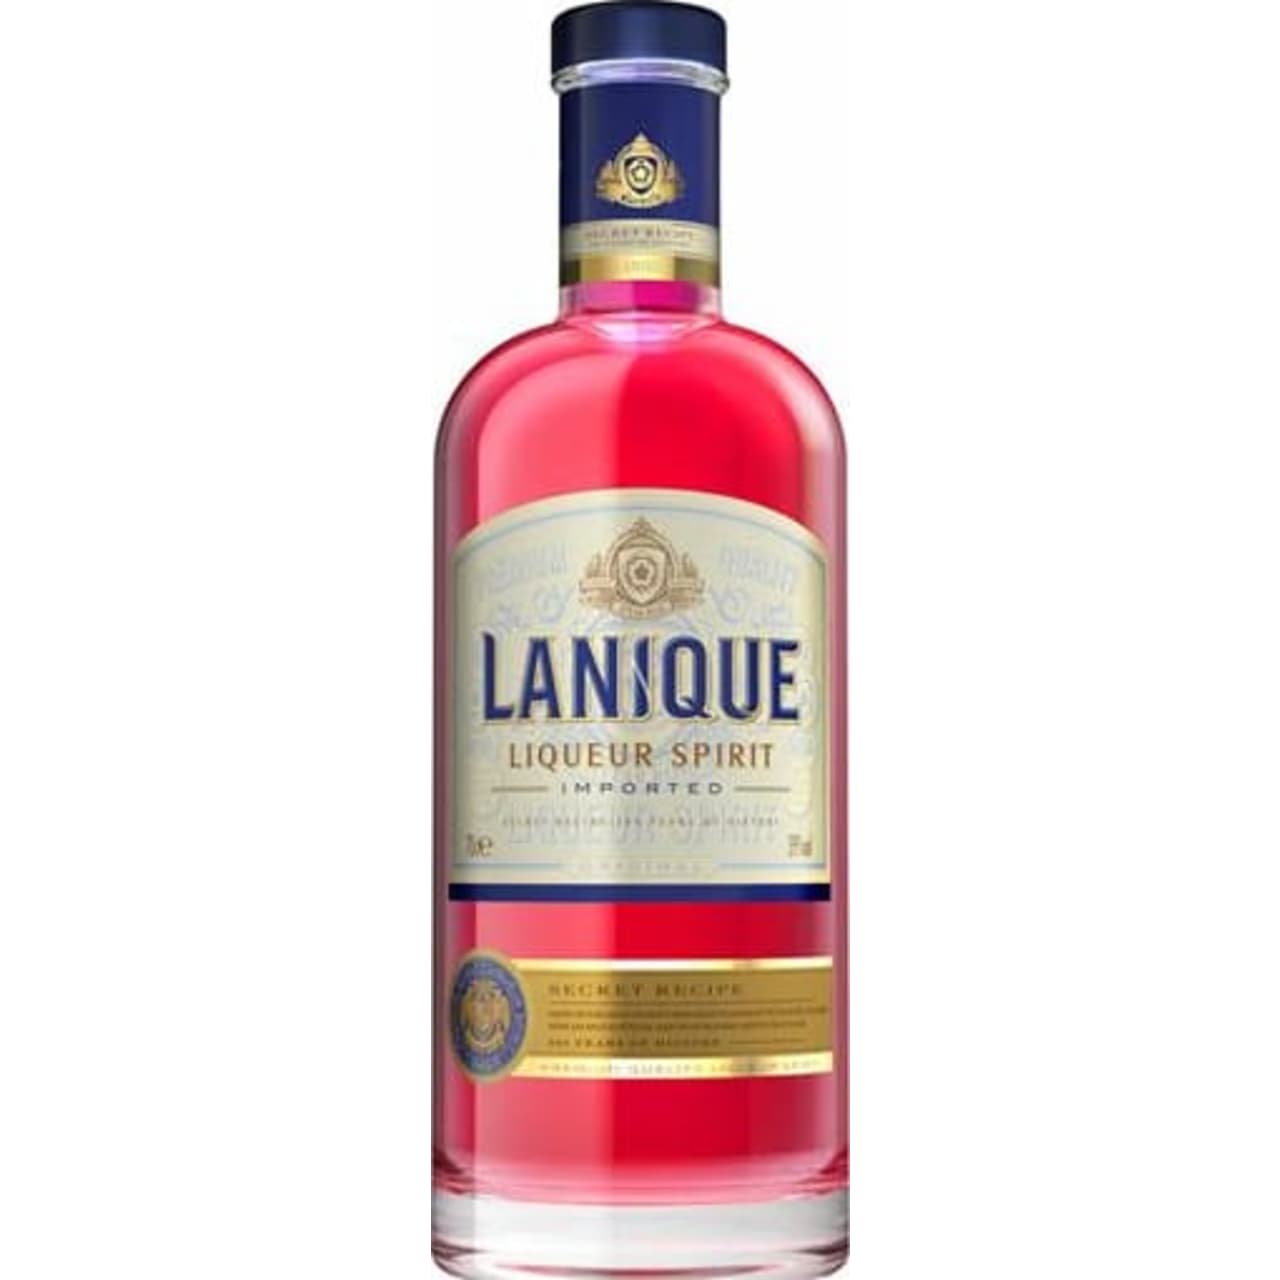 A tasty rose petal-flavoured Polish liqueur, each bottle of Lanique is made using thousands of hand-picked rose petals.